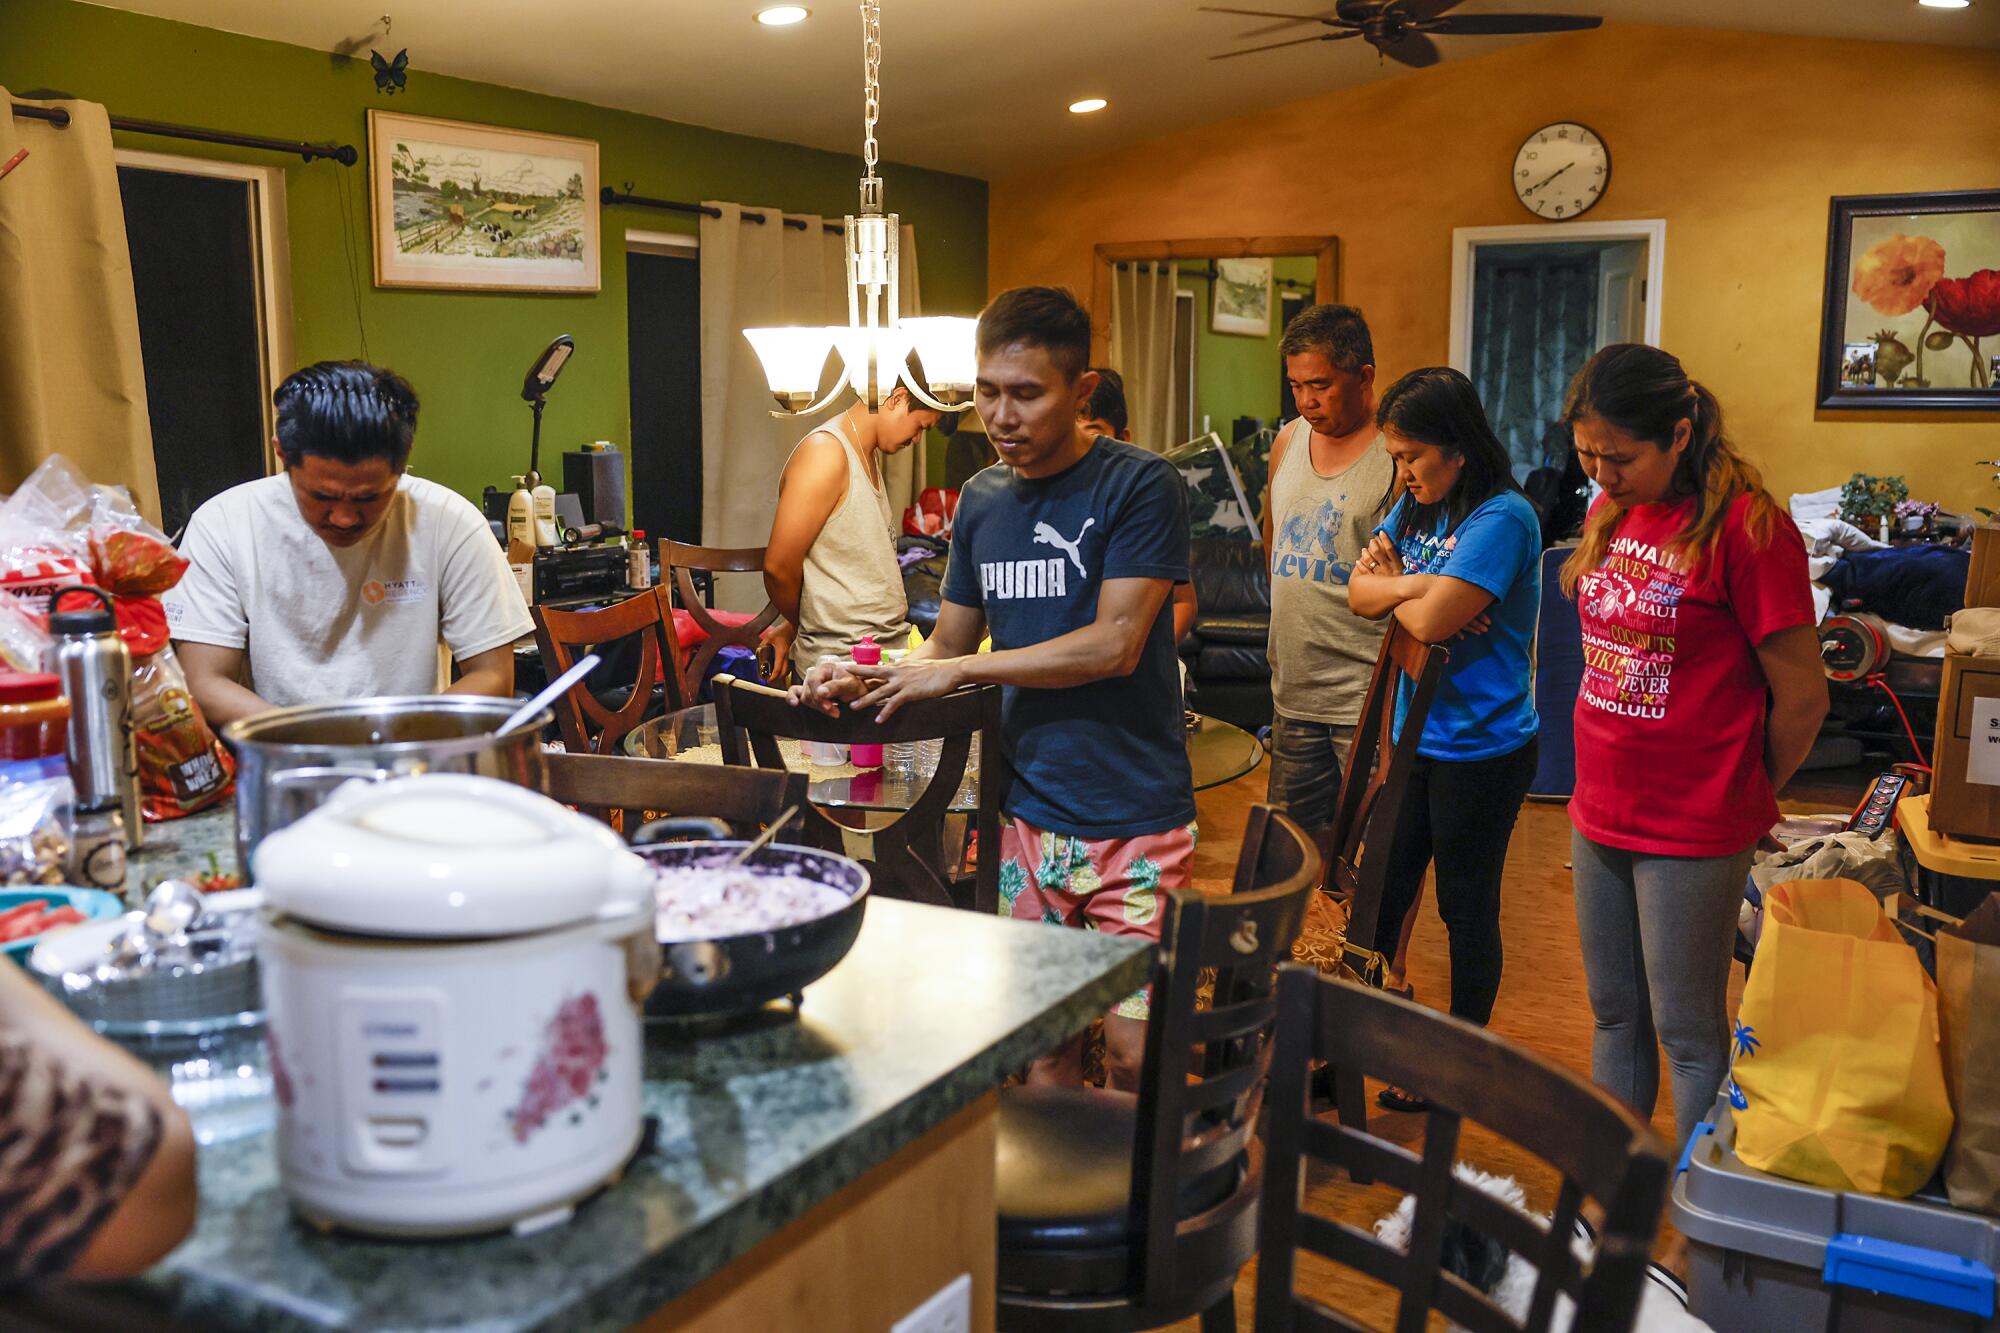 People stand with heads bowed before a kitchen counter, where a rice cooker and pots and pans sit